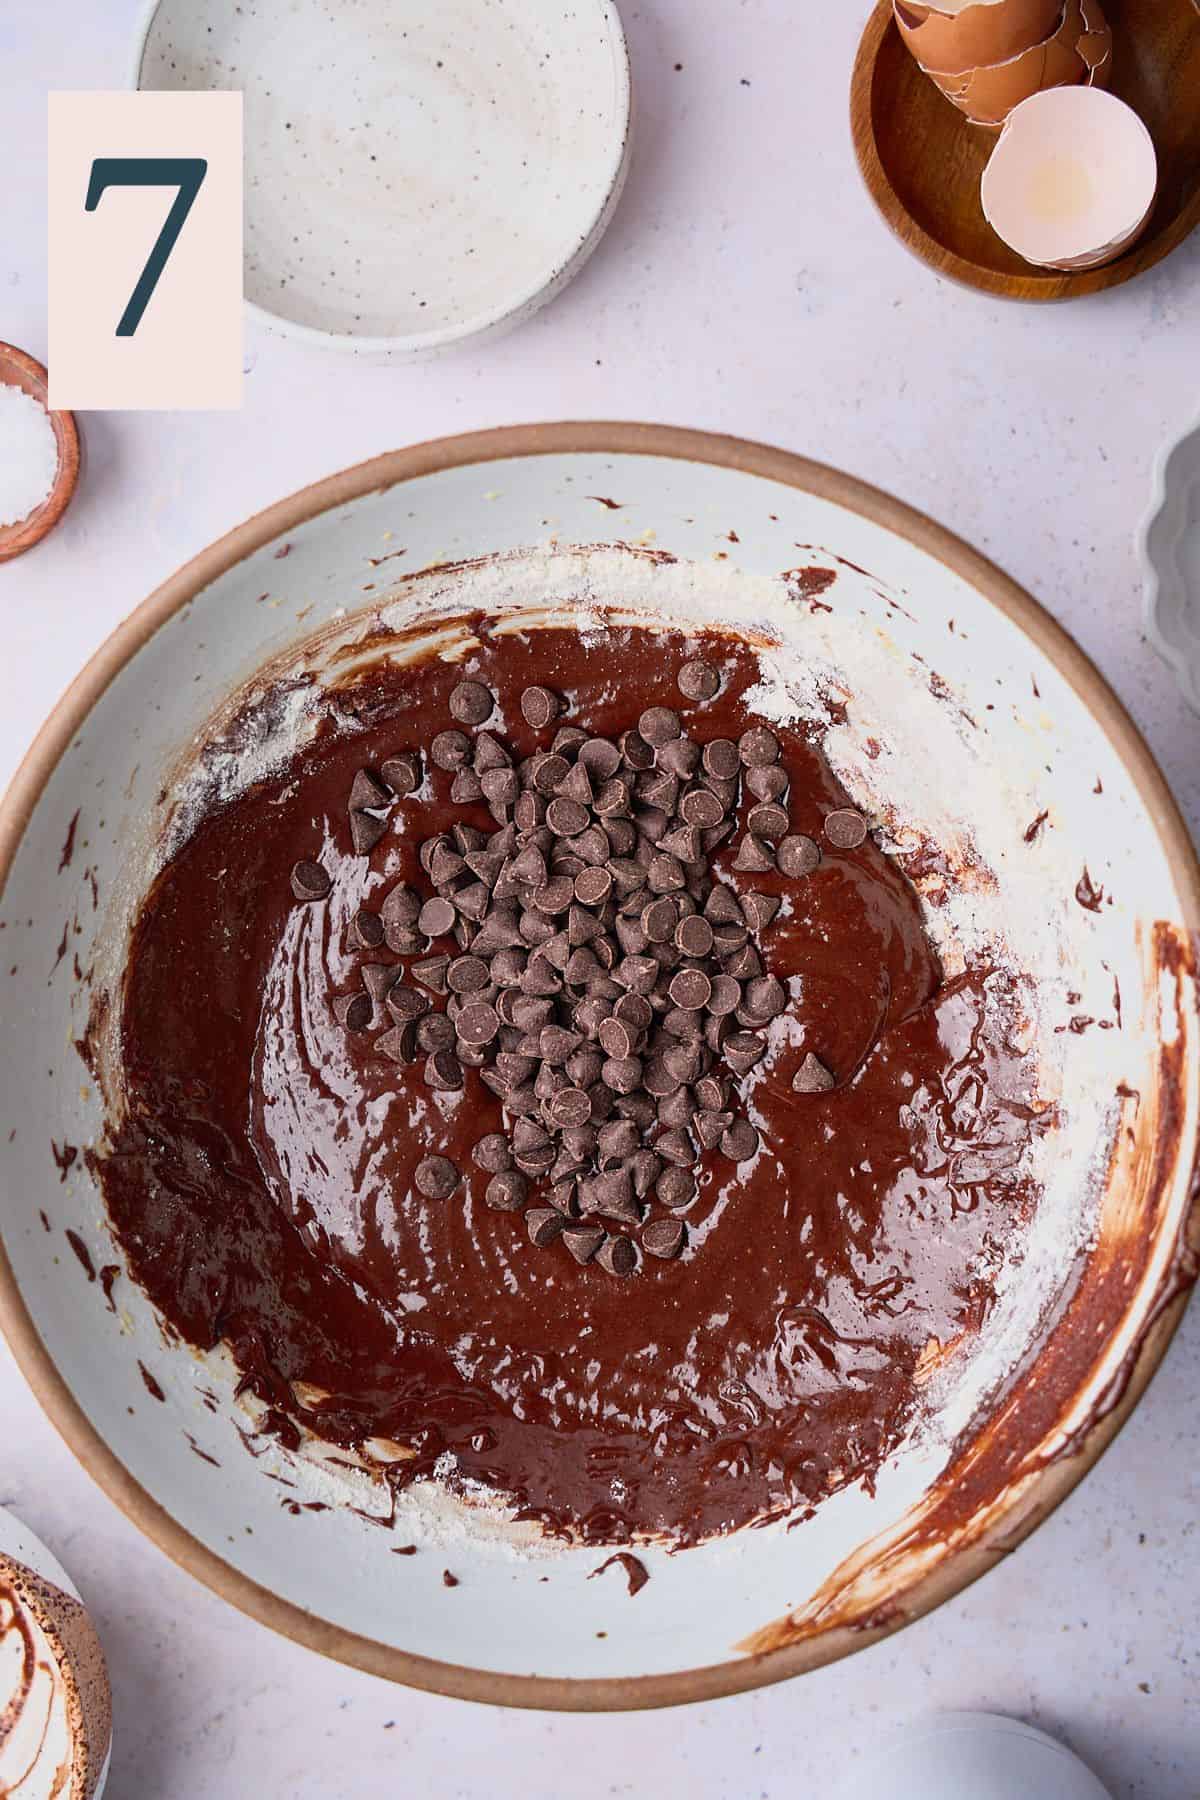 Mostly mixed brownie batter in a large bowl with chocolate chips added. 